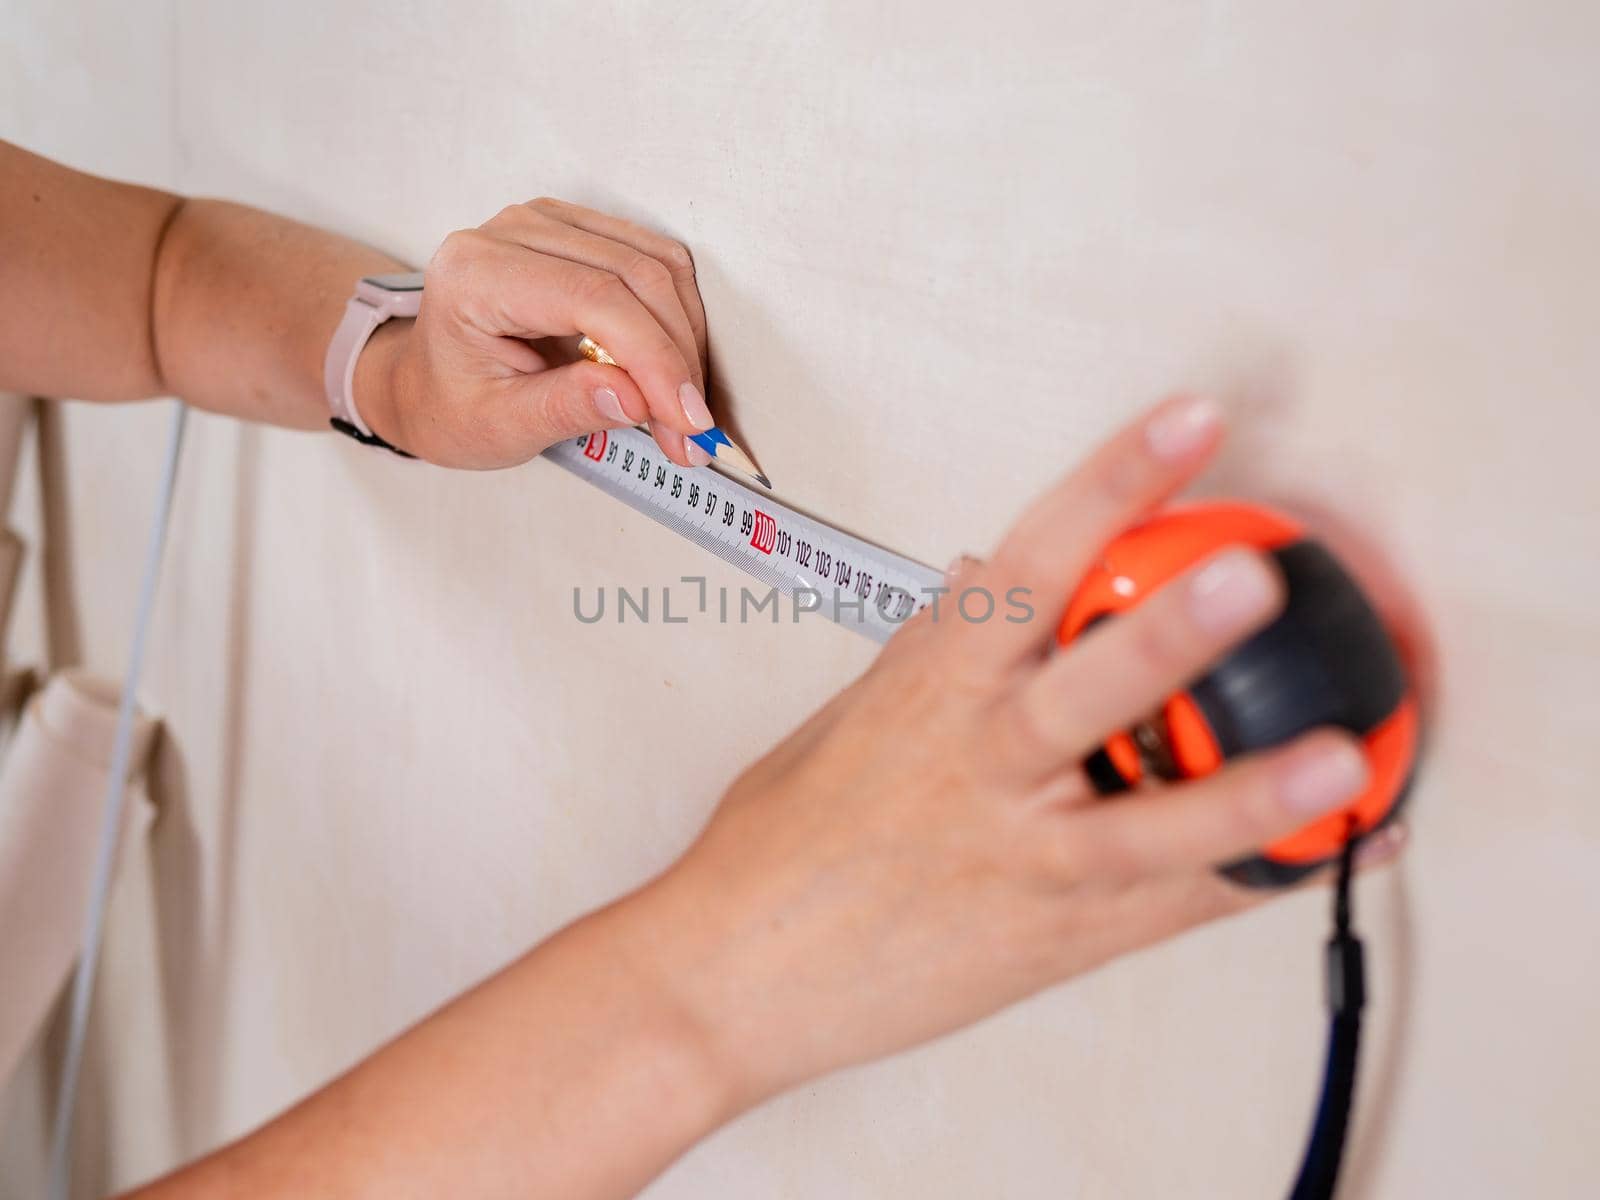 A woman makes a measurement on the wall in a room using a measuring tape.